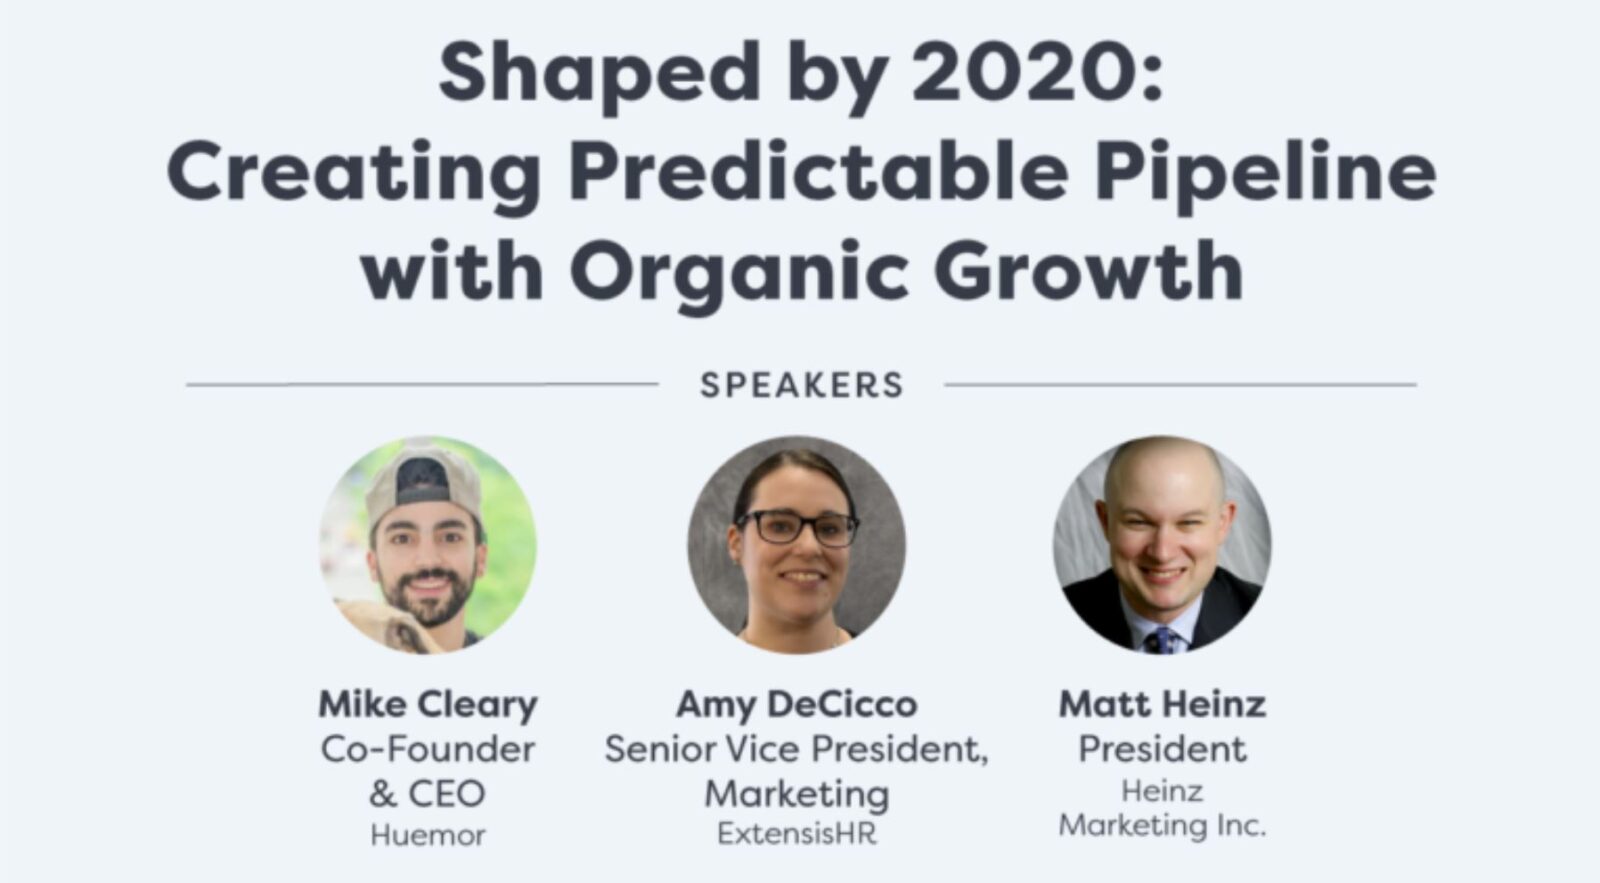 [Webinar] Shaped by 2020: Creating Predictable Pipeline with Organic Growth